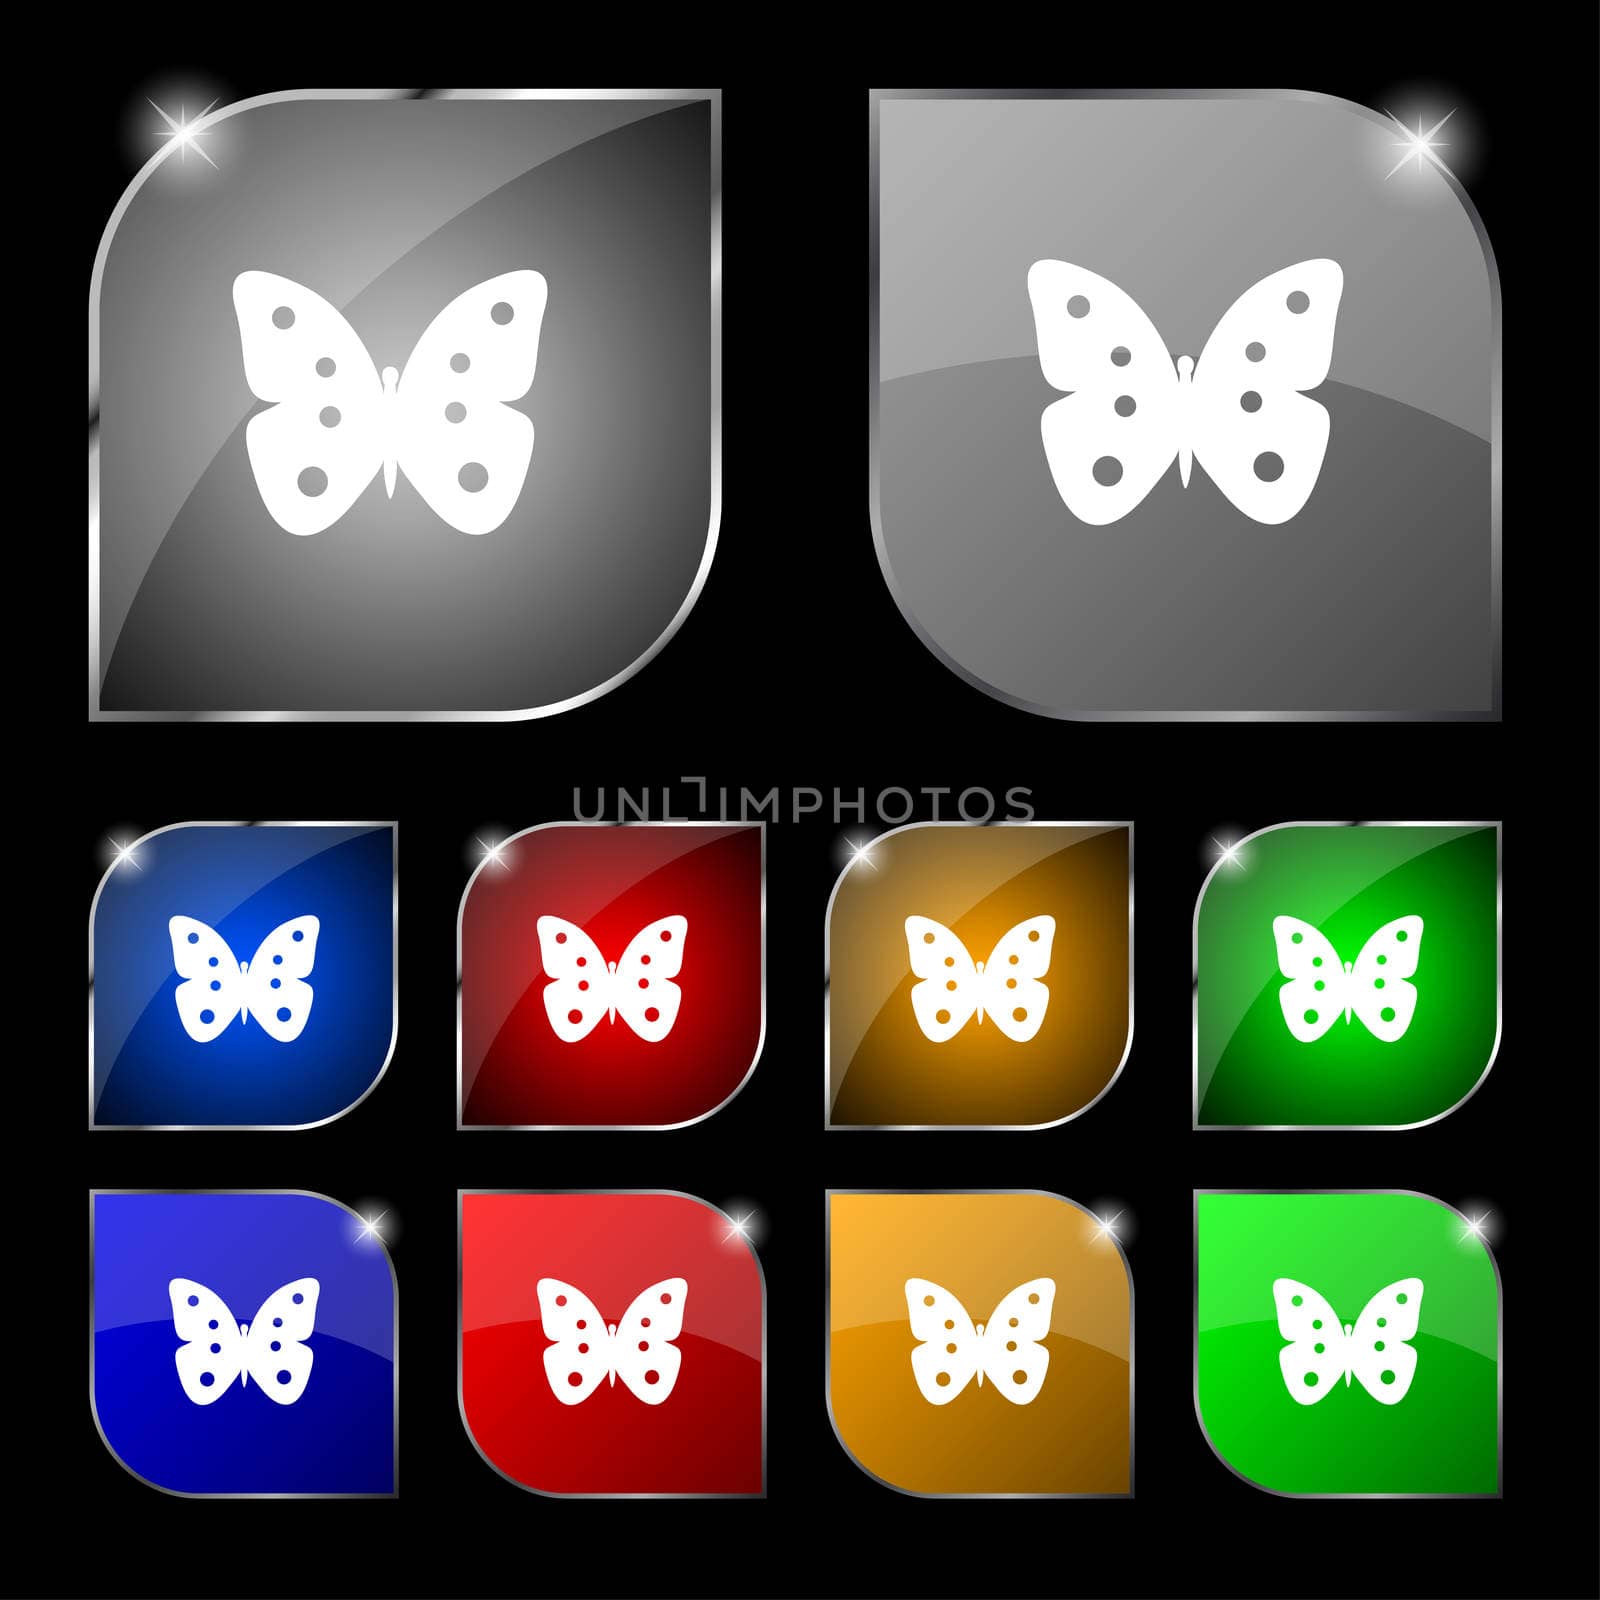 Butterfly sign icon. insect symbol. Set colourful buttons. illustration